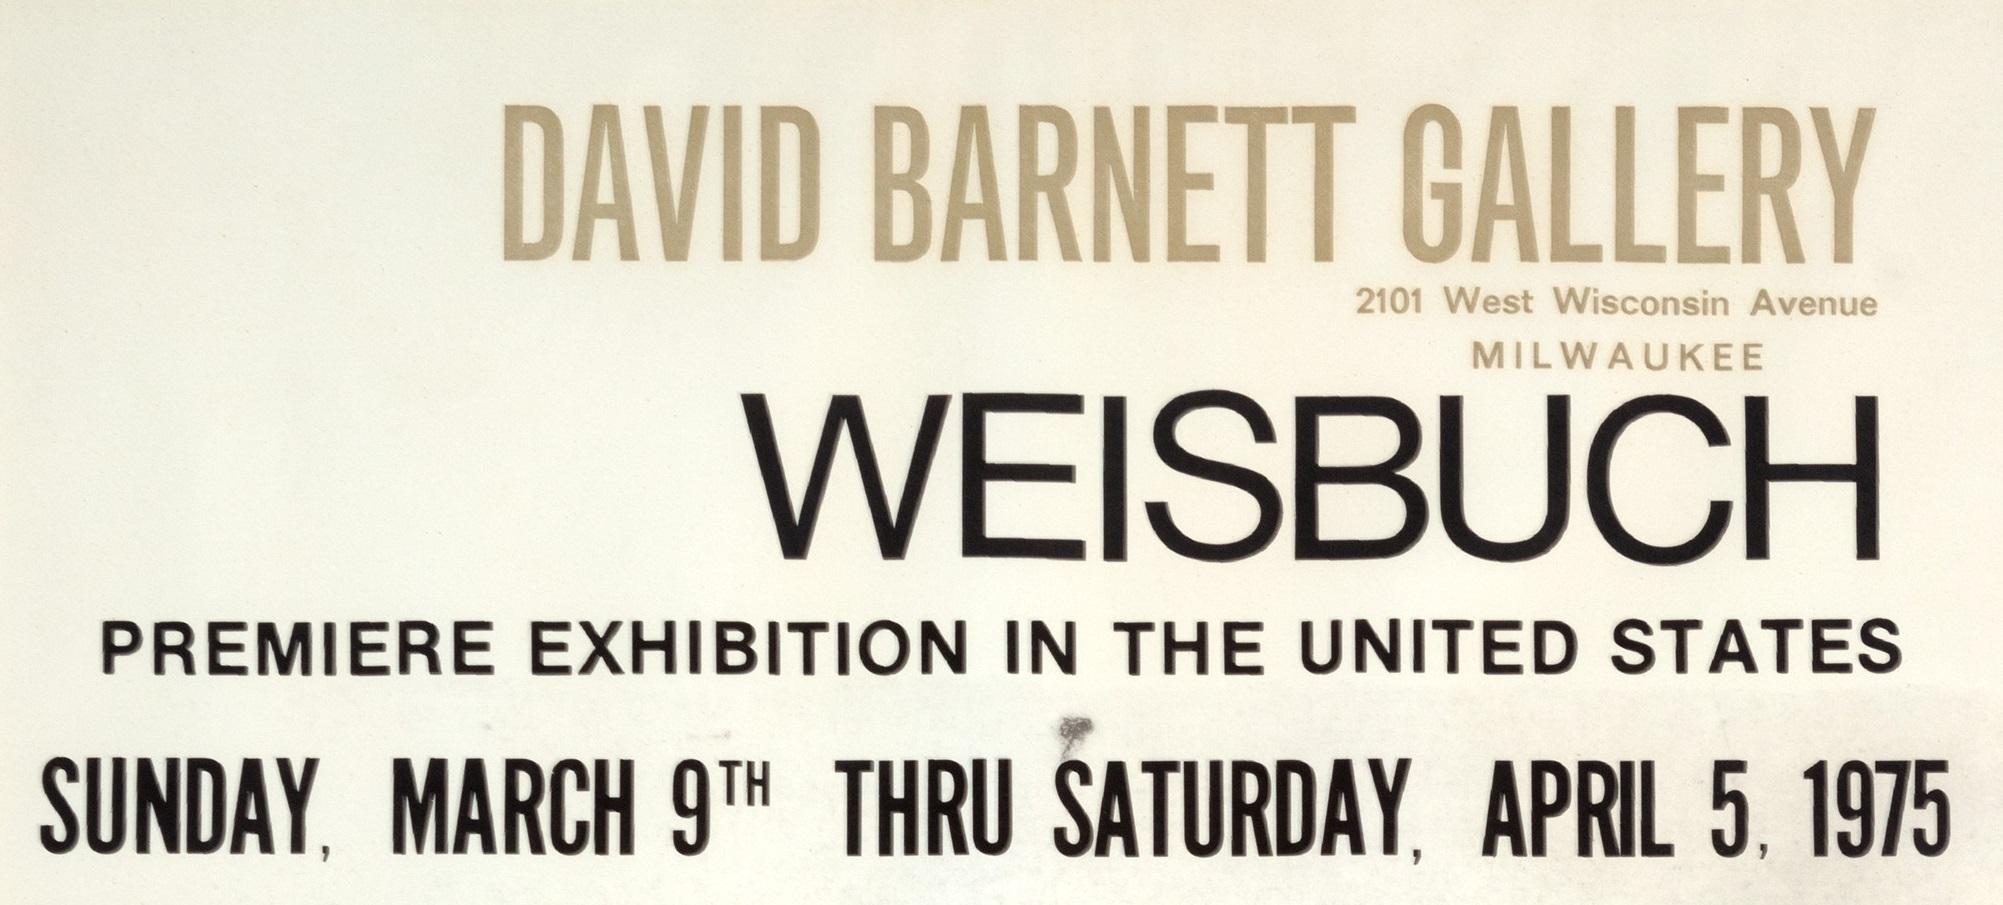 U.S. Premiere Exhibition Poster at the David Barnett Gallery (43/58) - Print by Claude Weisbuch